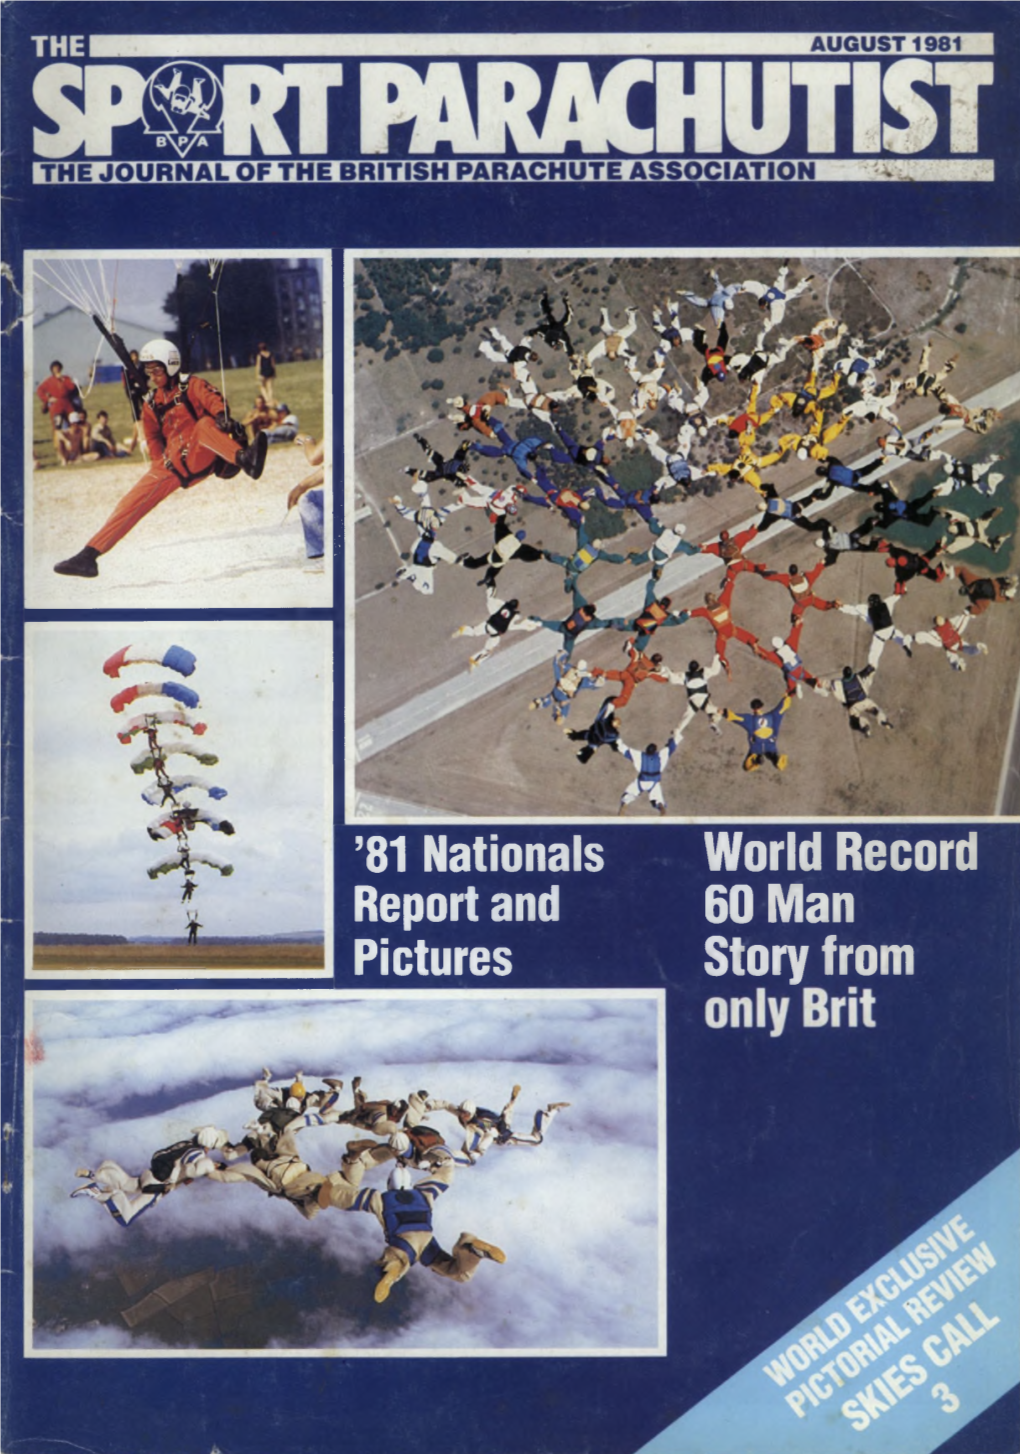 '81 Nationals Report and Pictures World Record 60 Man Story From